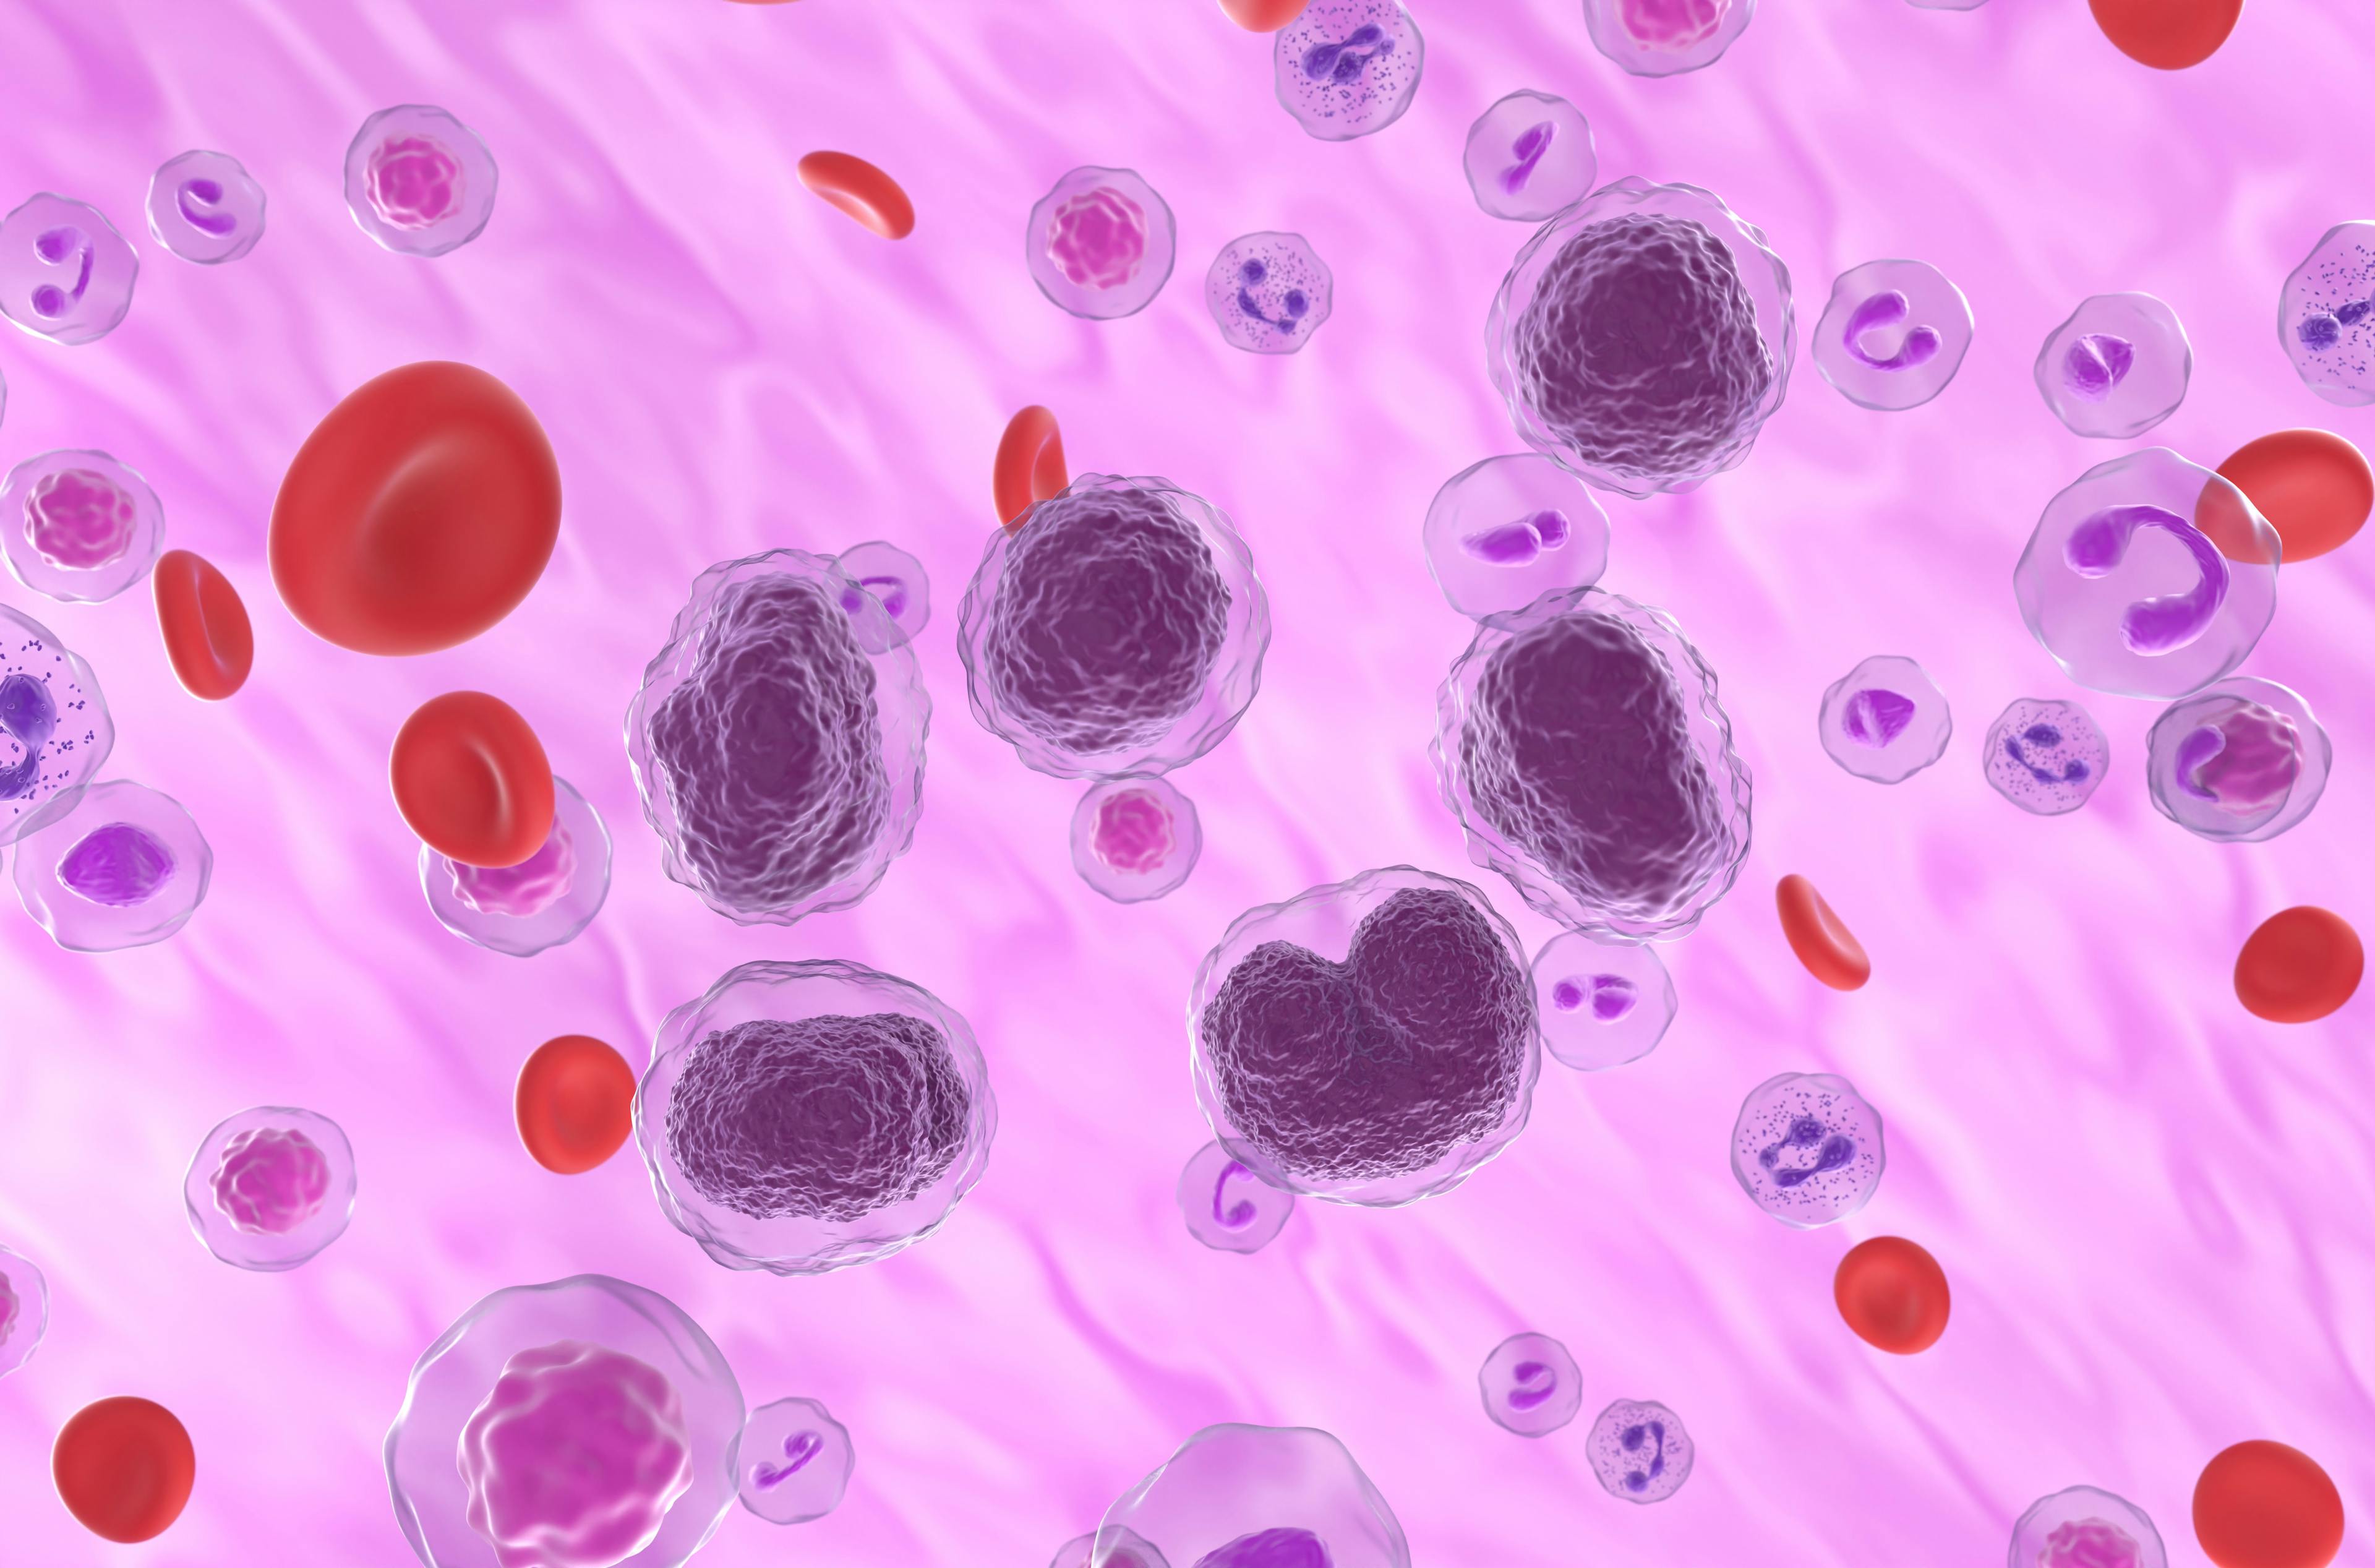 Non-hodgkin lymphoma cells in the blood flow